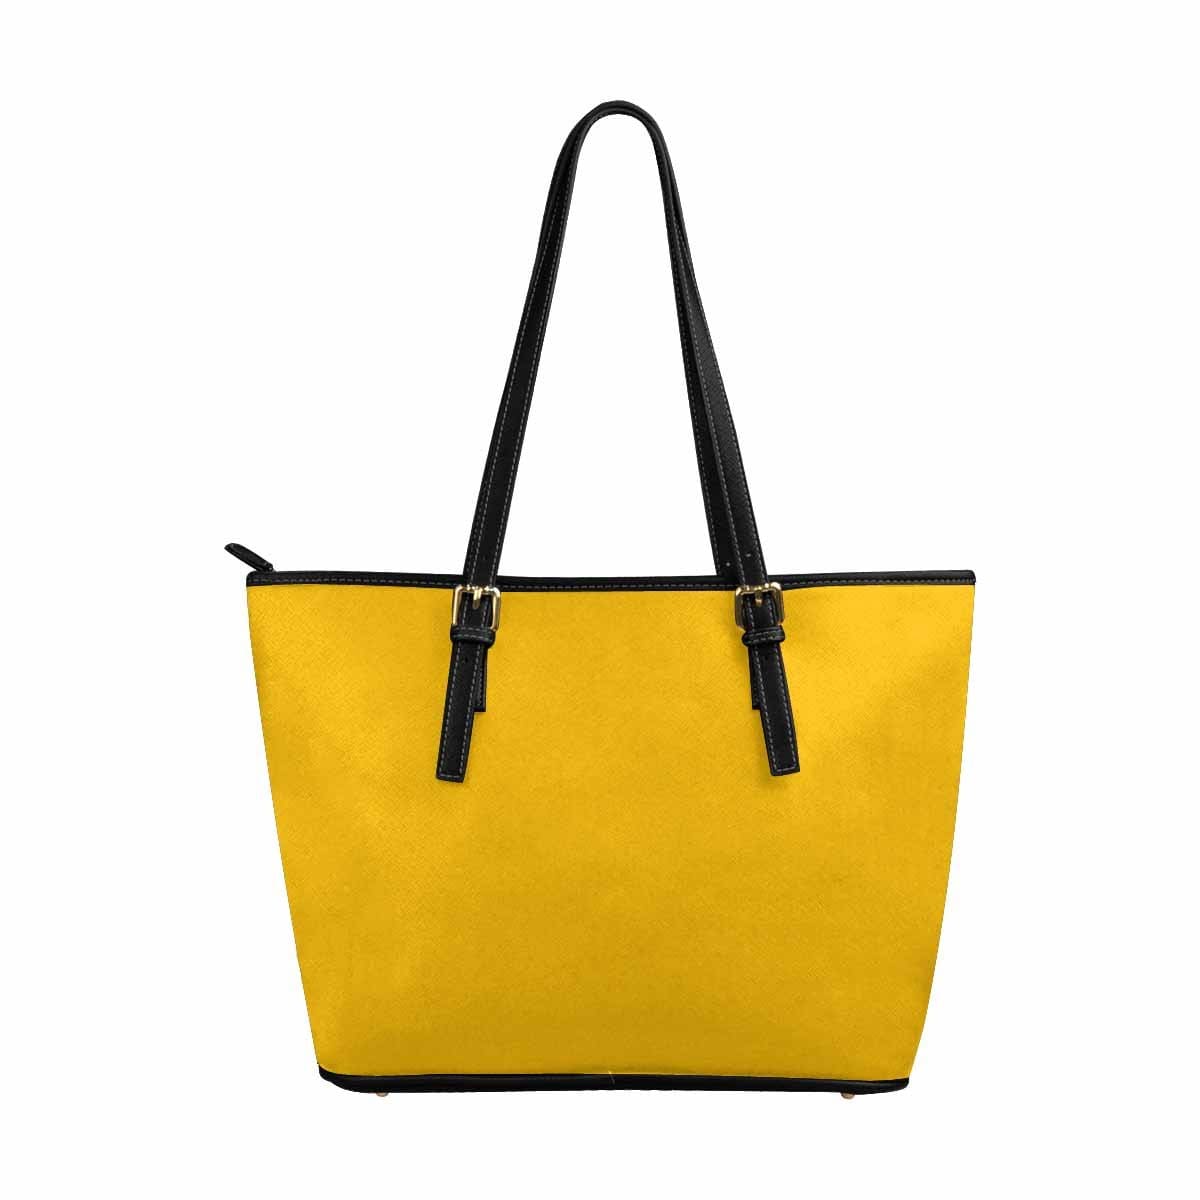 Large Leather Tote Shoulder Bag - Amber Orange - Bags | Leather Tote Bags